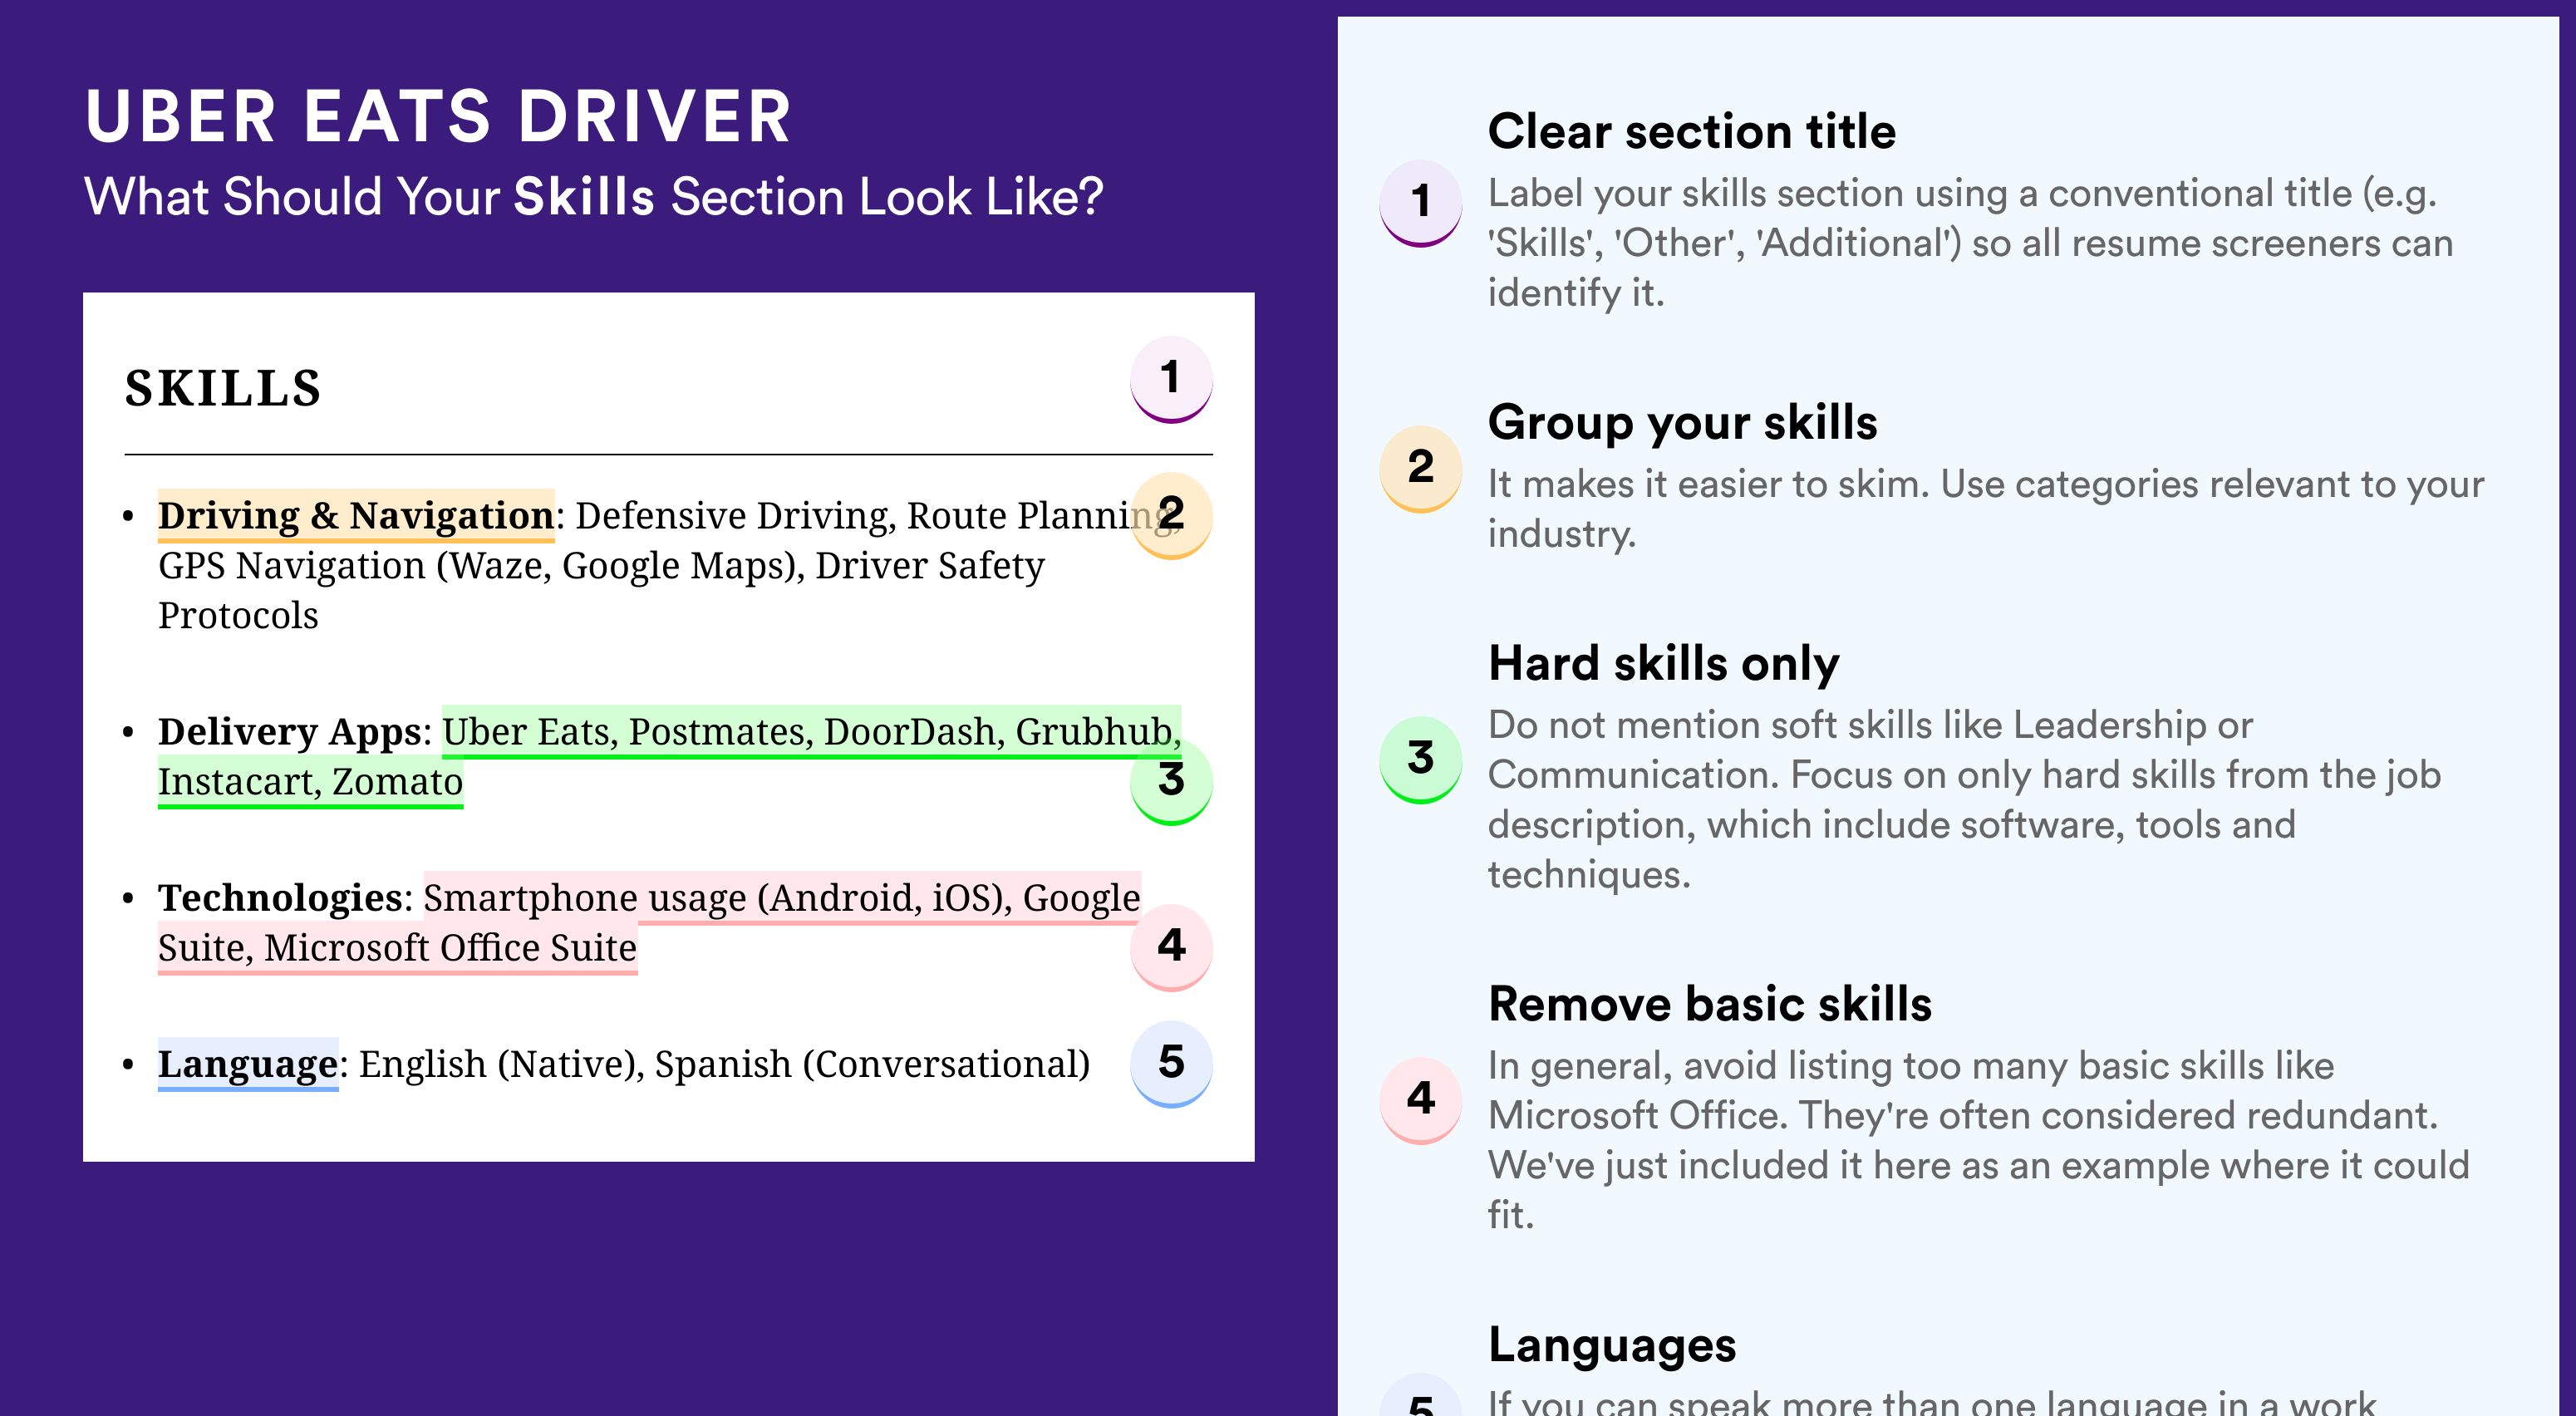 How To Write Your Skills Section - Uber Eats Driver Roles